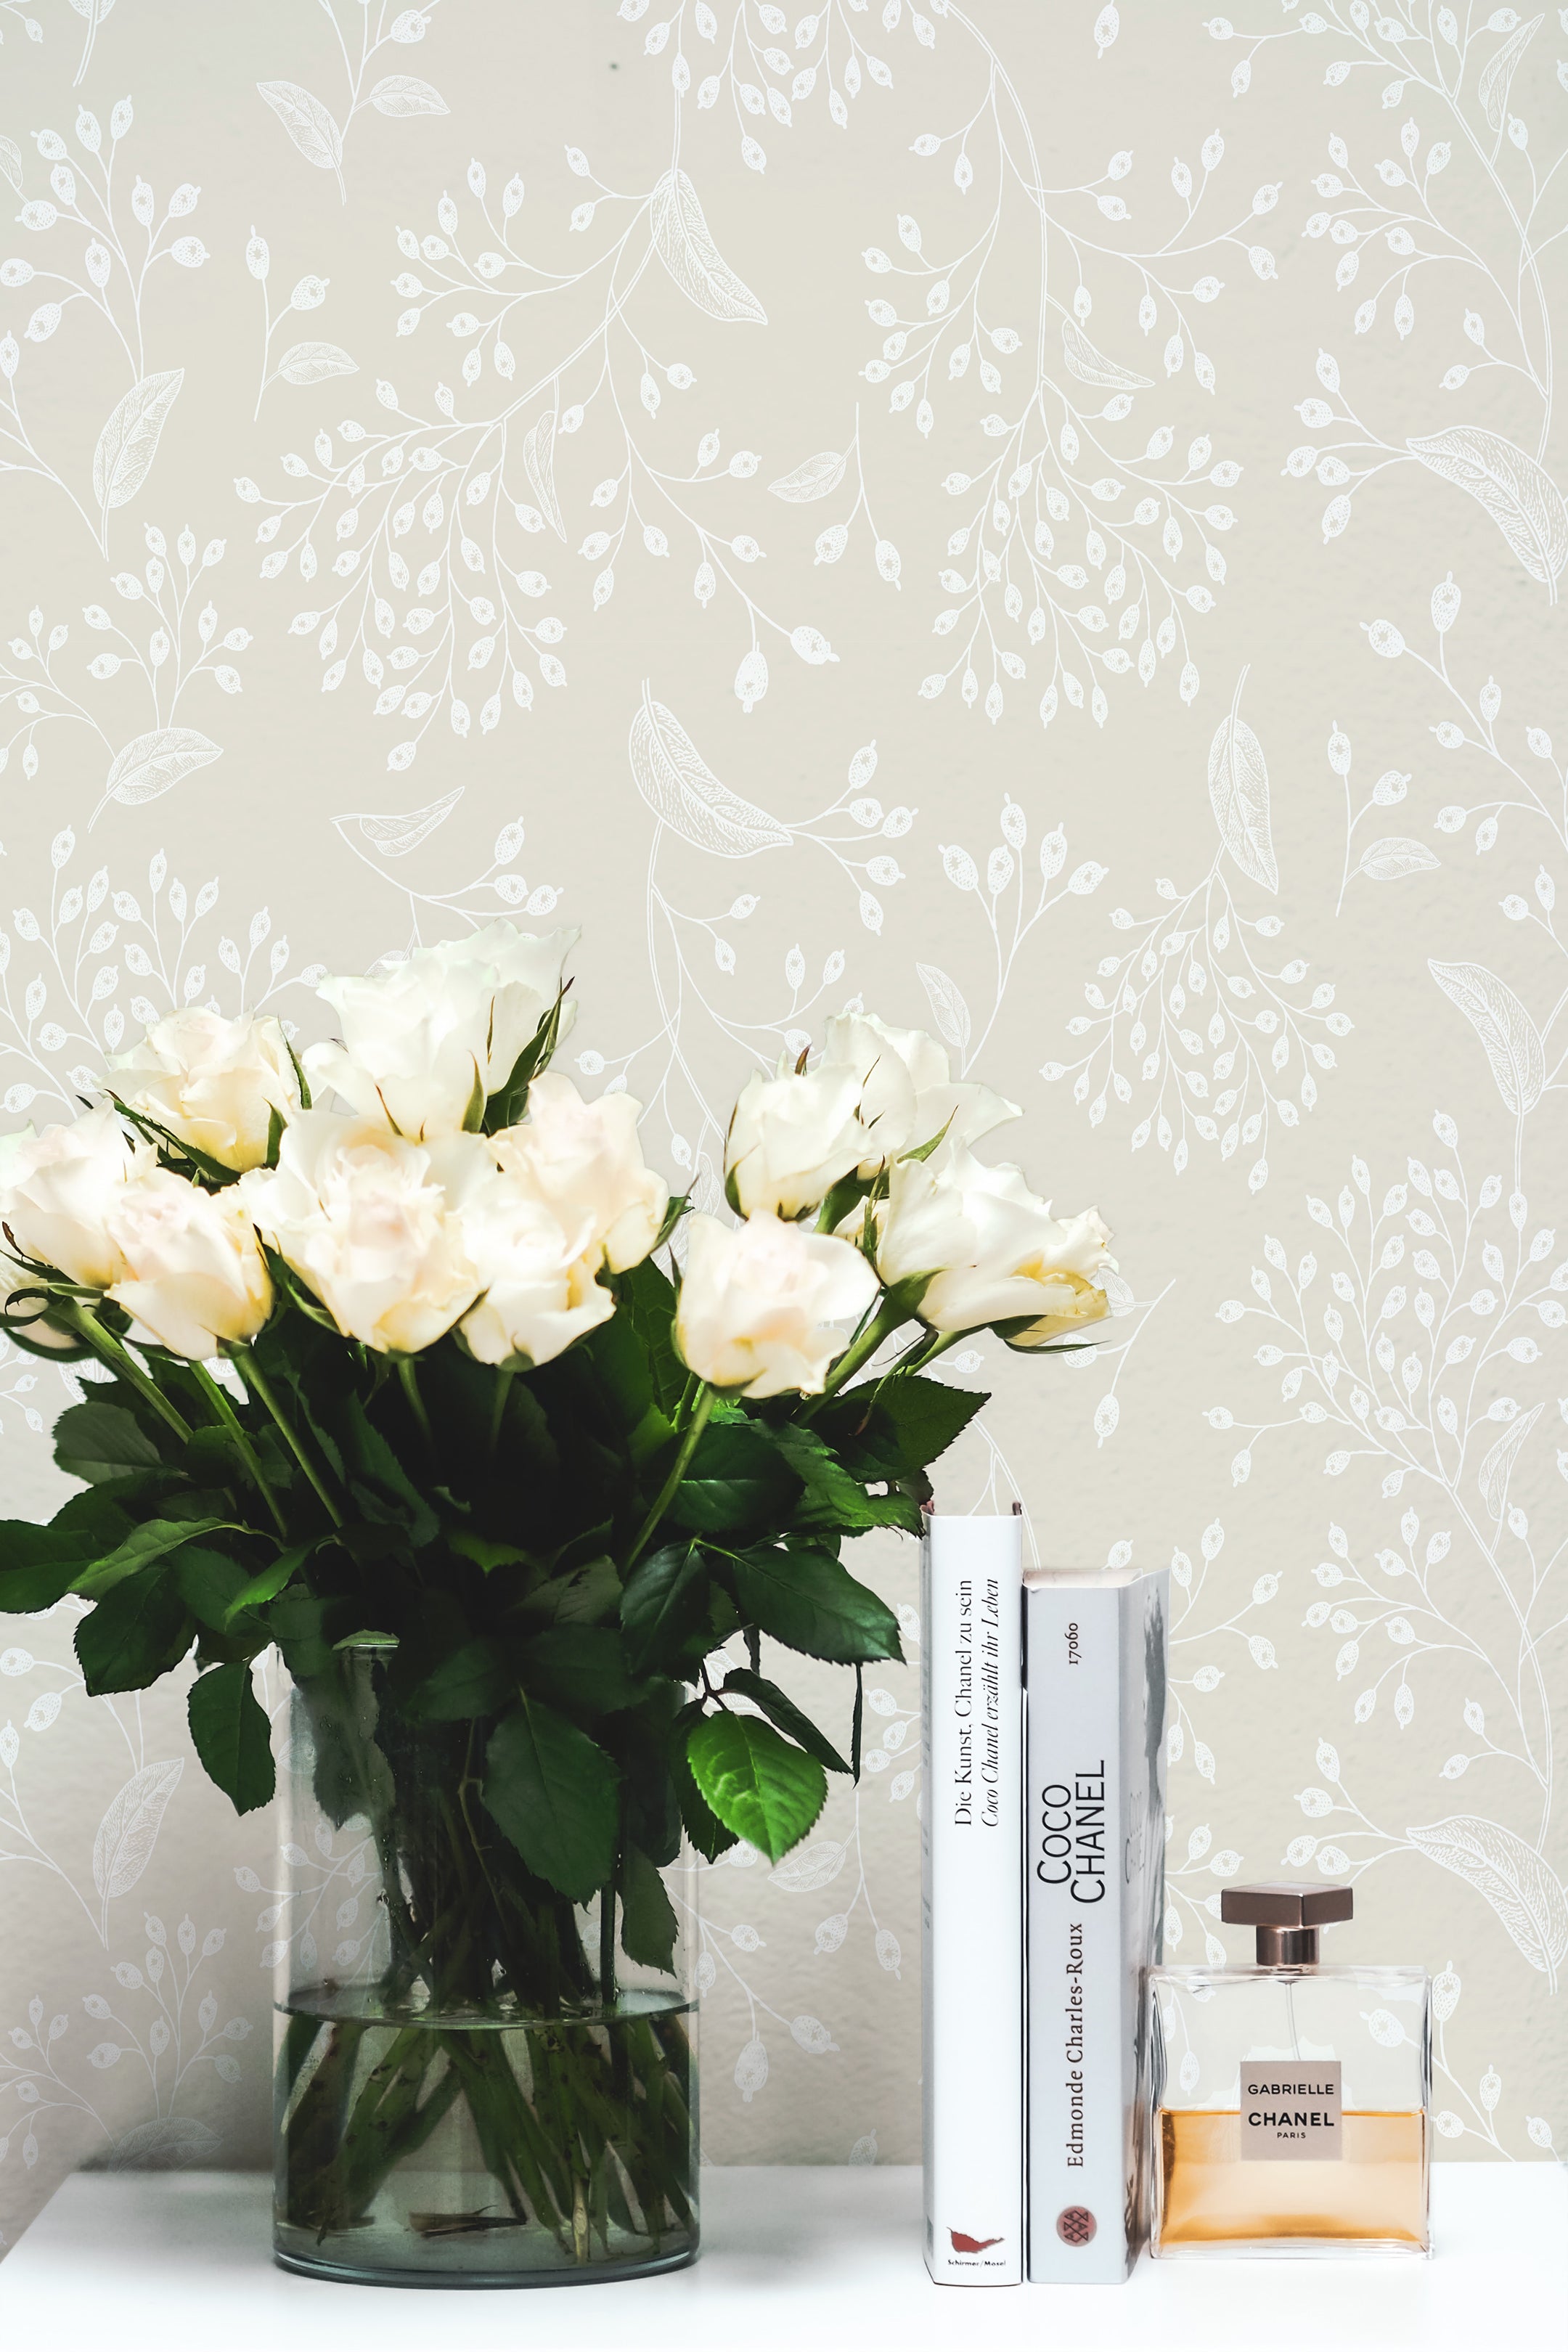 A chic and stylish room setting featuring the Botanical Whisper Wallpaper. This room includes a beige botanical patterned wallpaper, a glass vase filled with fresh white roses, and a collection of books and luxury perfume bottles, creating a refined and cultured atmosphere.